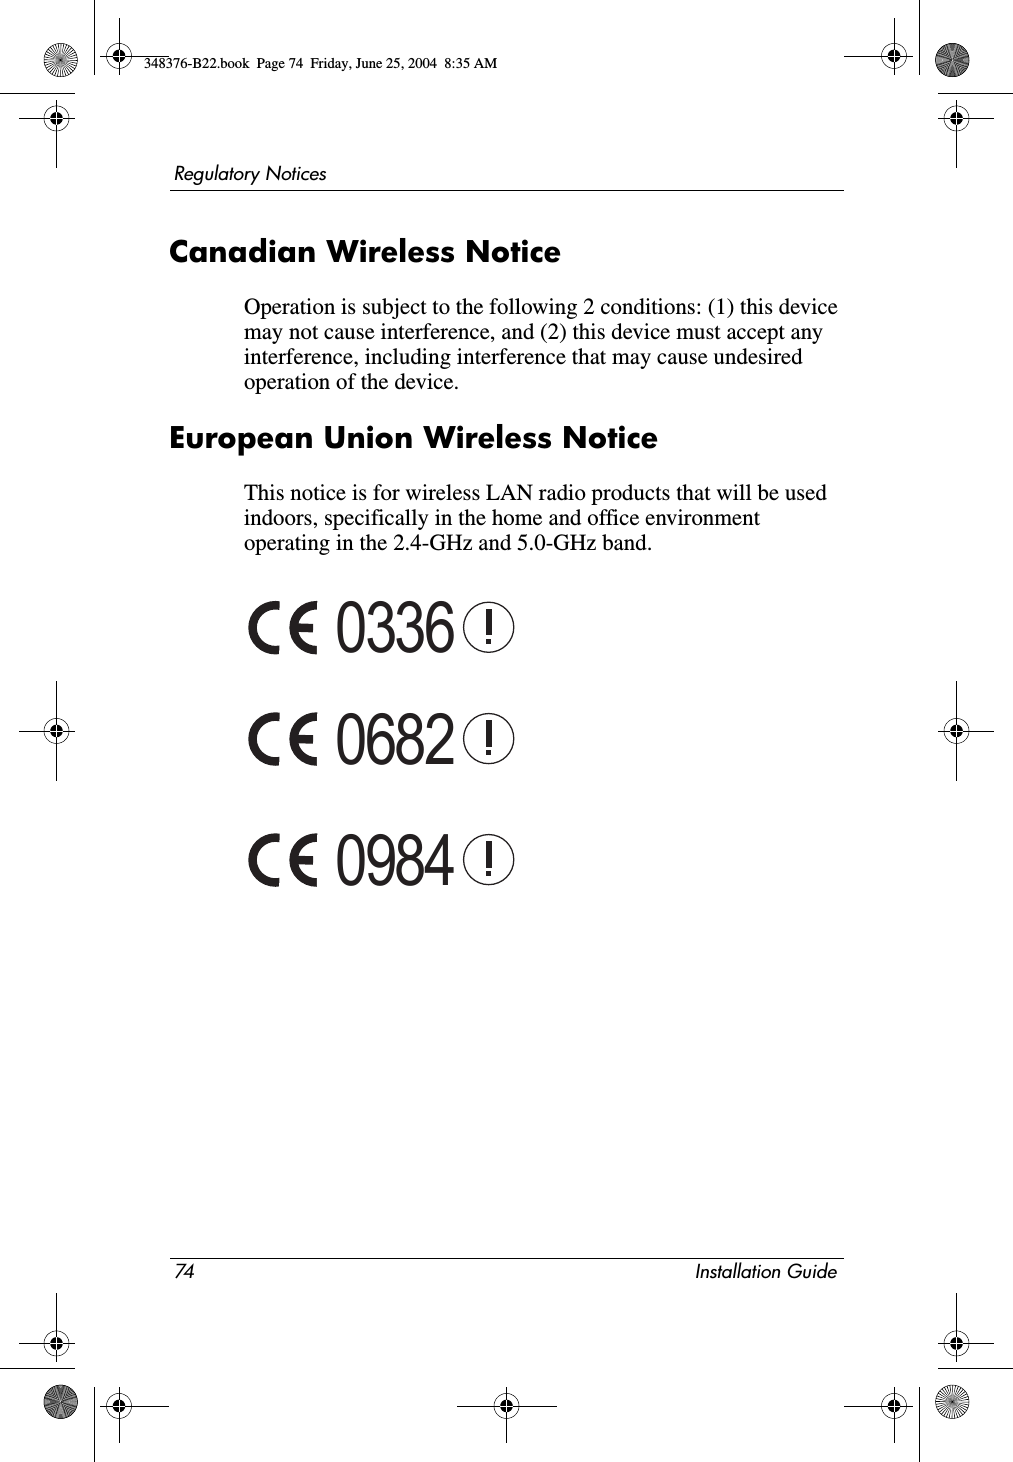 74 Installation GuideRegulatory NoticesCanadian Wireless NoticeOperation is subject to the following 2 conditions: (1) this device may not cause interference, and (2) this device must accept any interference, including interference that may cause undesired operation of the device.European Union Wireless NoticeThis notice is for wireless LAN radio products that will be used indoors, specifically in the home and office environment operating in the 2.4-GHz and 5.0-GHz band.033606820984348376-B22.book  Page 74  Friday, June 25, 2004  8:35 AM